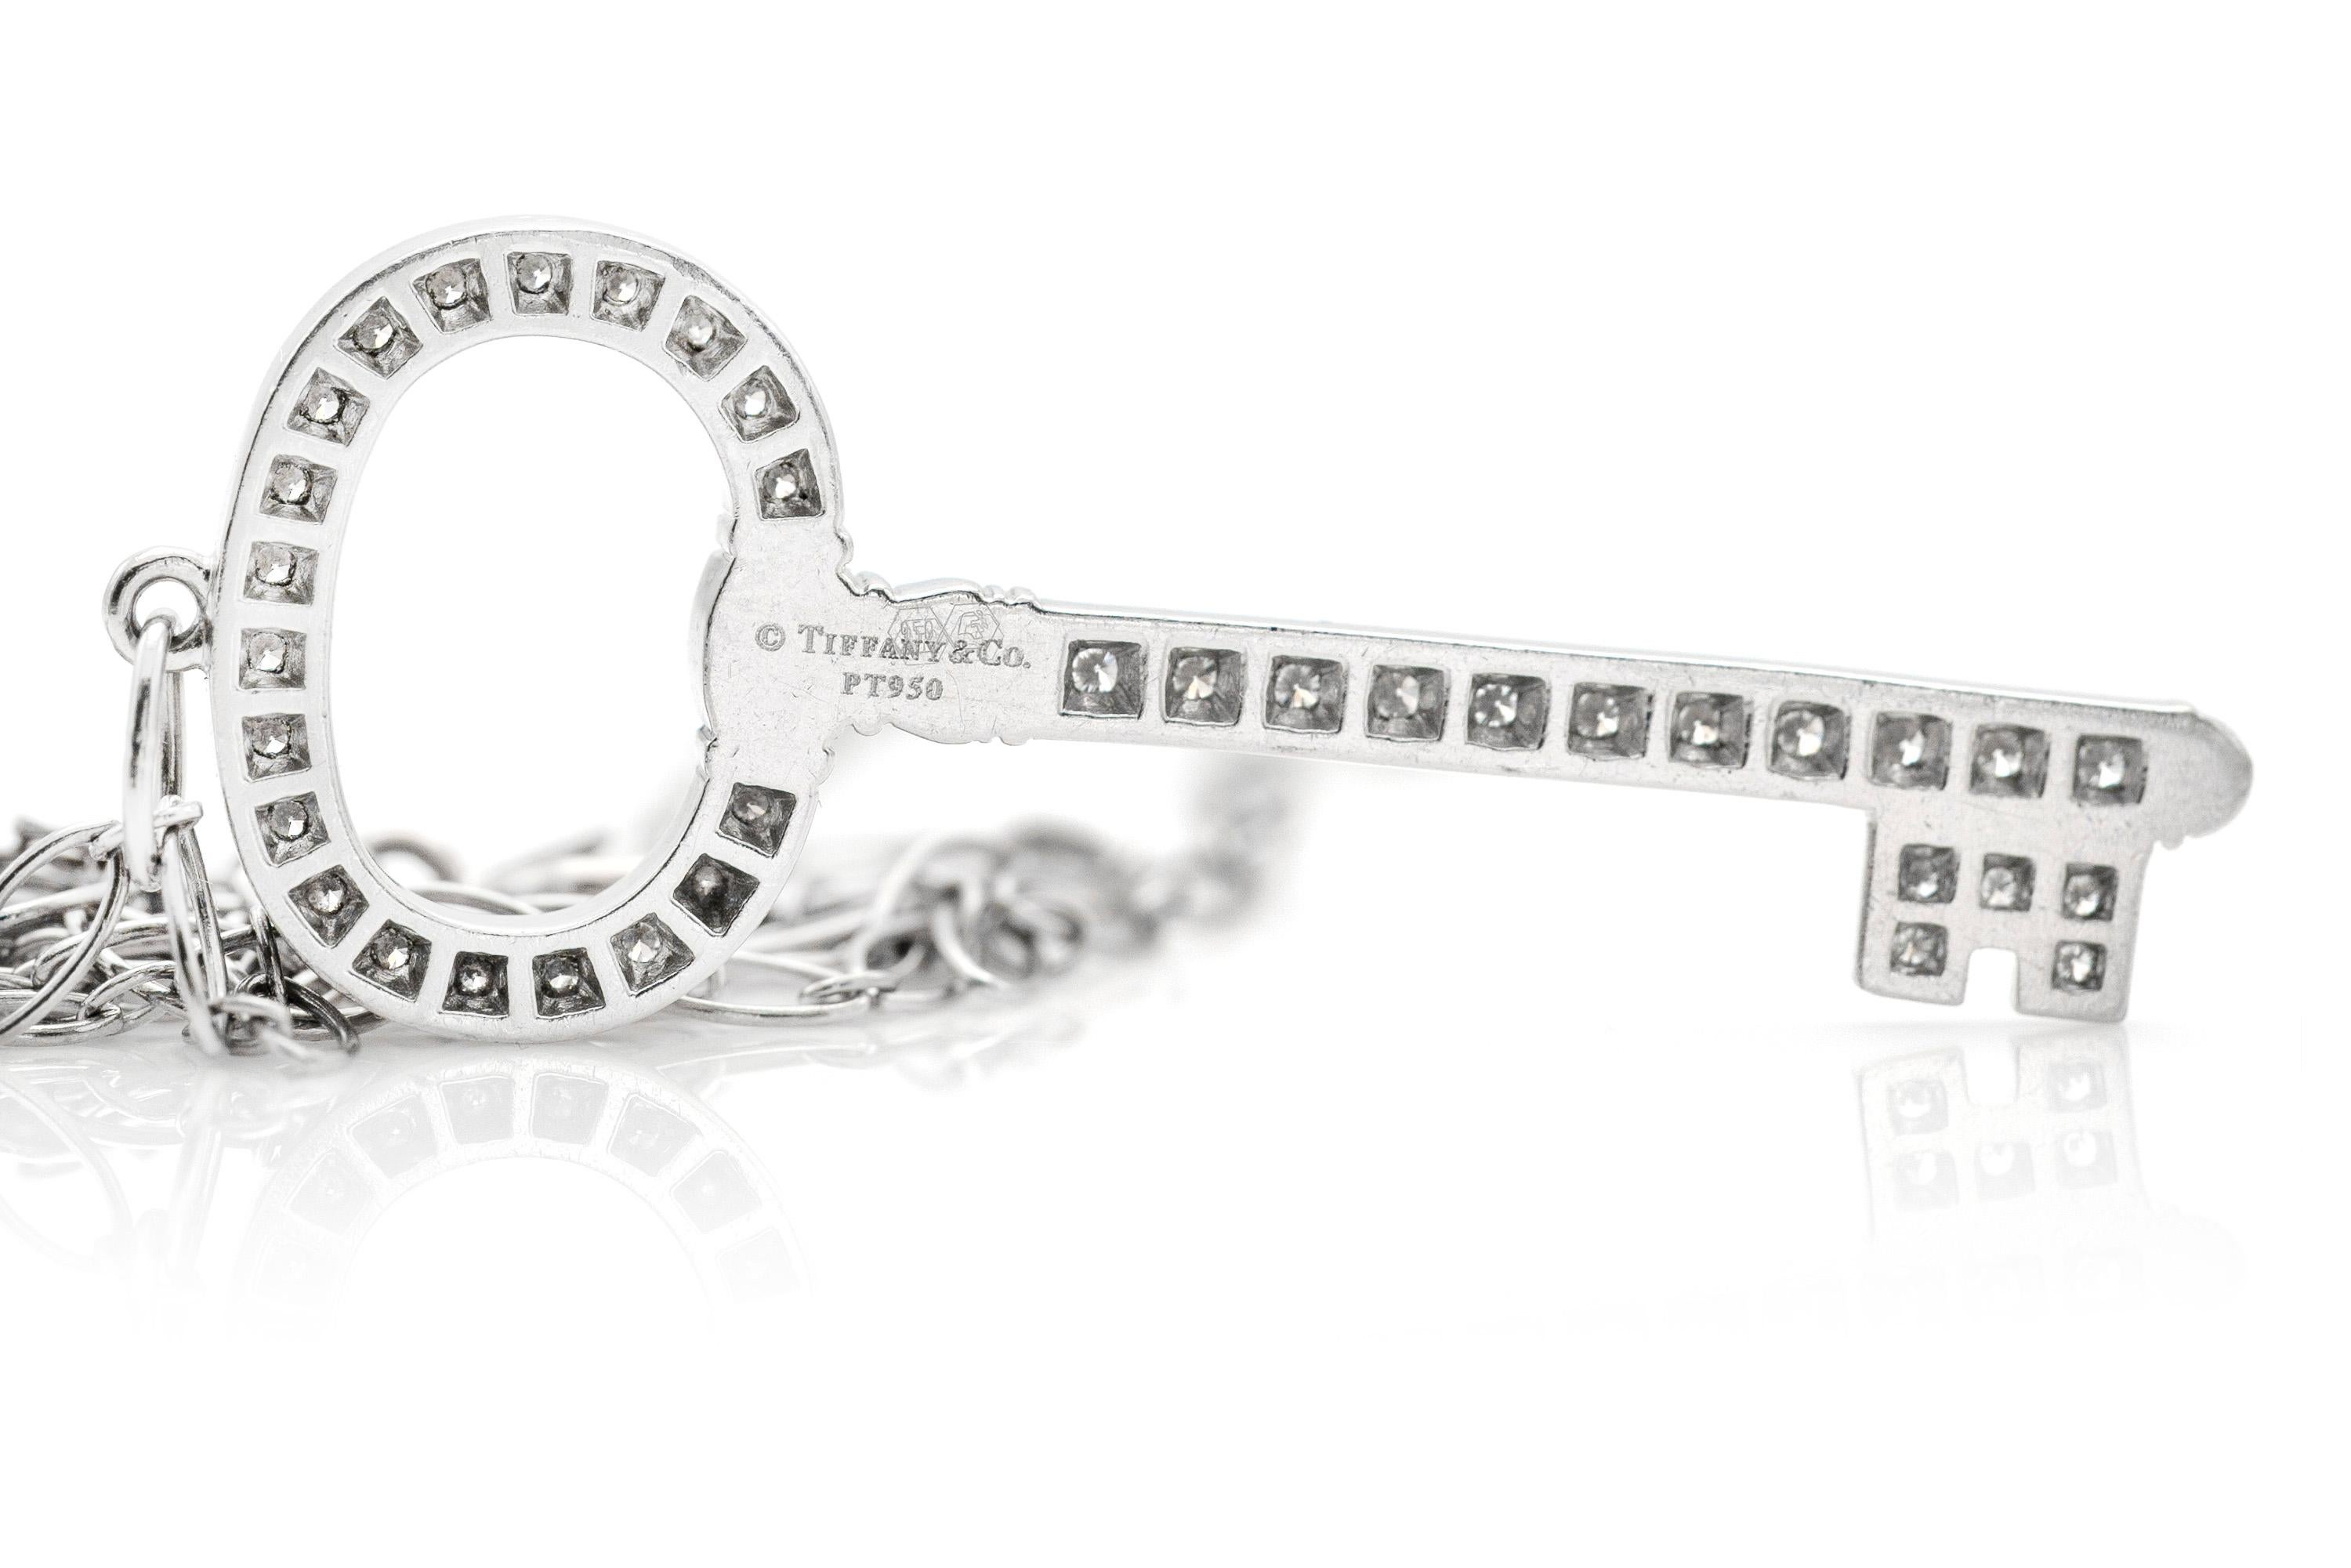 Finely crafted in platinum with diamonds covering the entire key, with original chain. Signed Tiffany & Co. 